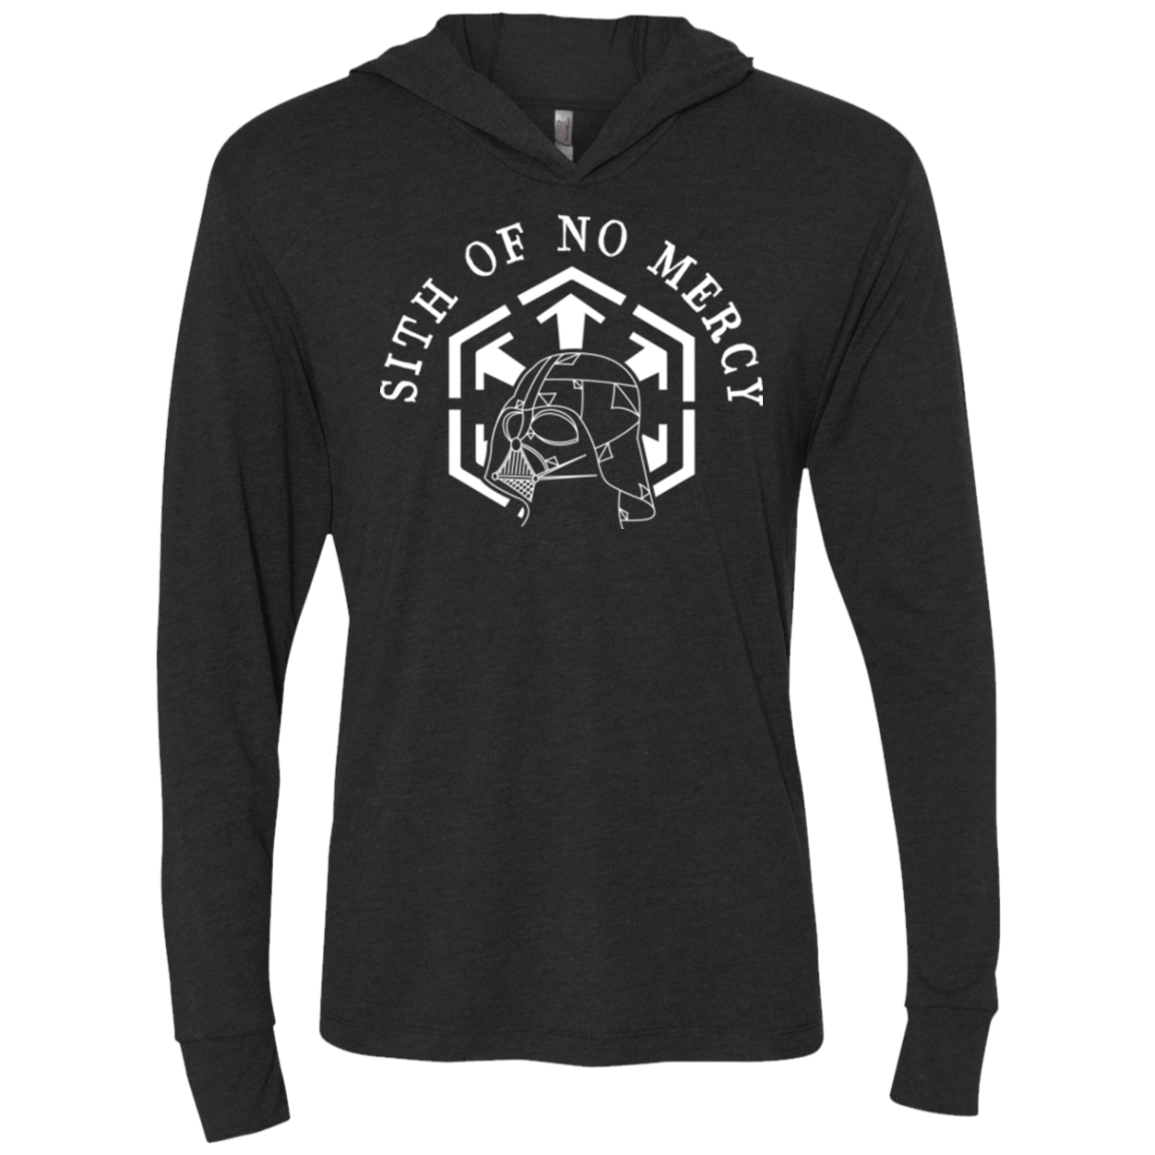 T-Shirts Vintage Black / X-Small SITH OF NO MERCY Triblend Long Sleeve Hoodie Tee